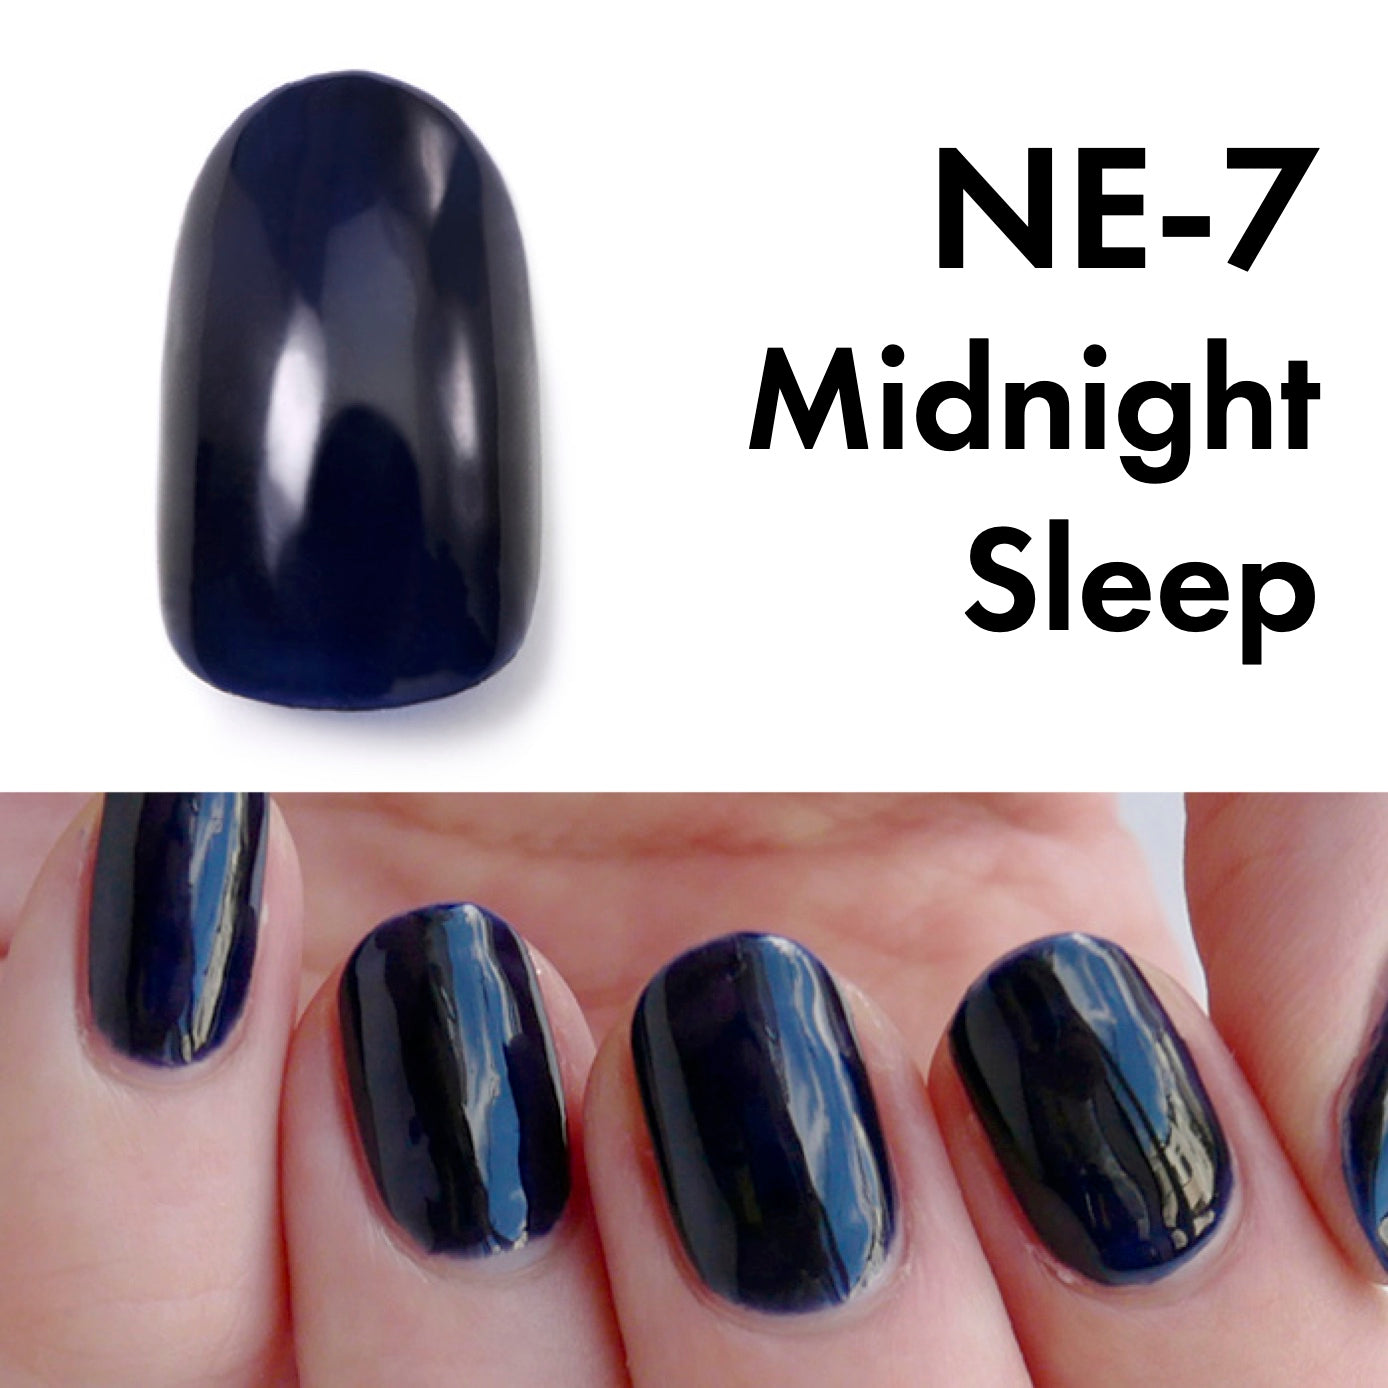 Buy SM FASHION Long Lasting Nail Polish | Nail Paint Combo 7 ml Each) - Set  of 2 Dark Blue-Blue Online at Low Prices in India - Amazon.in